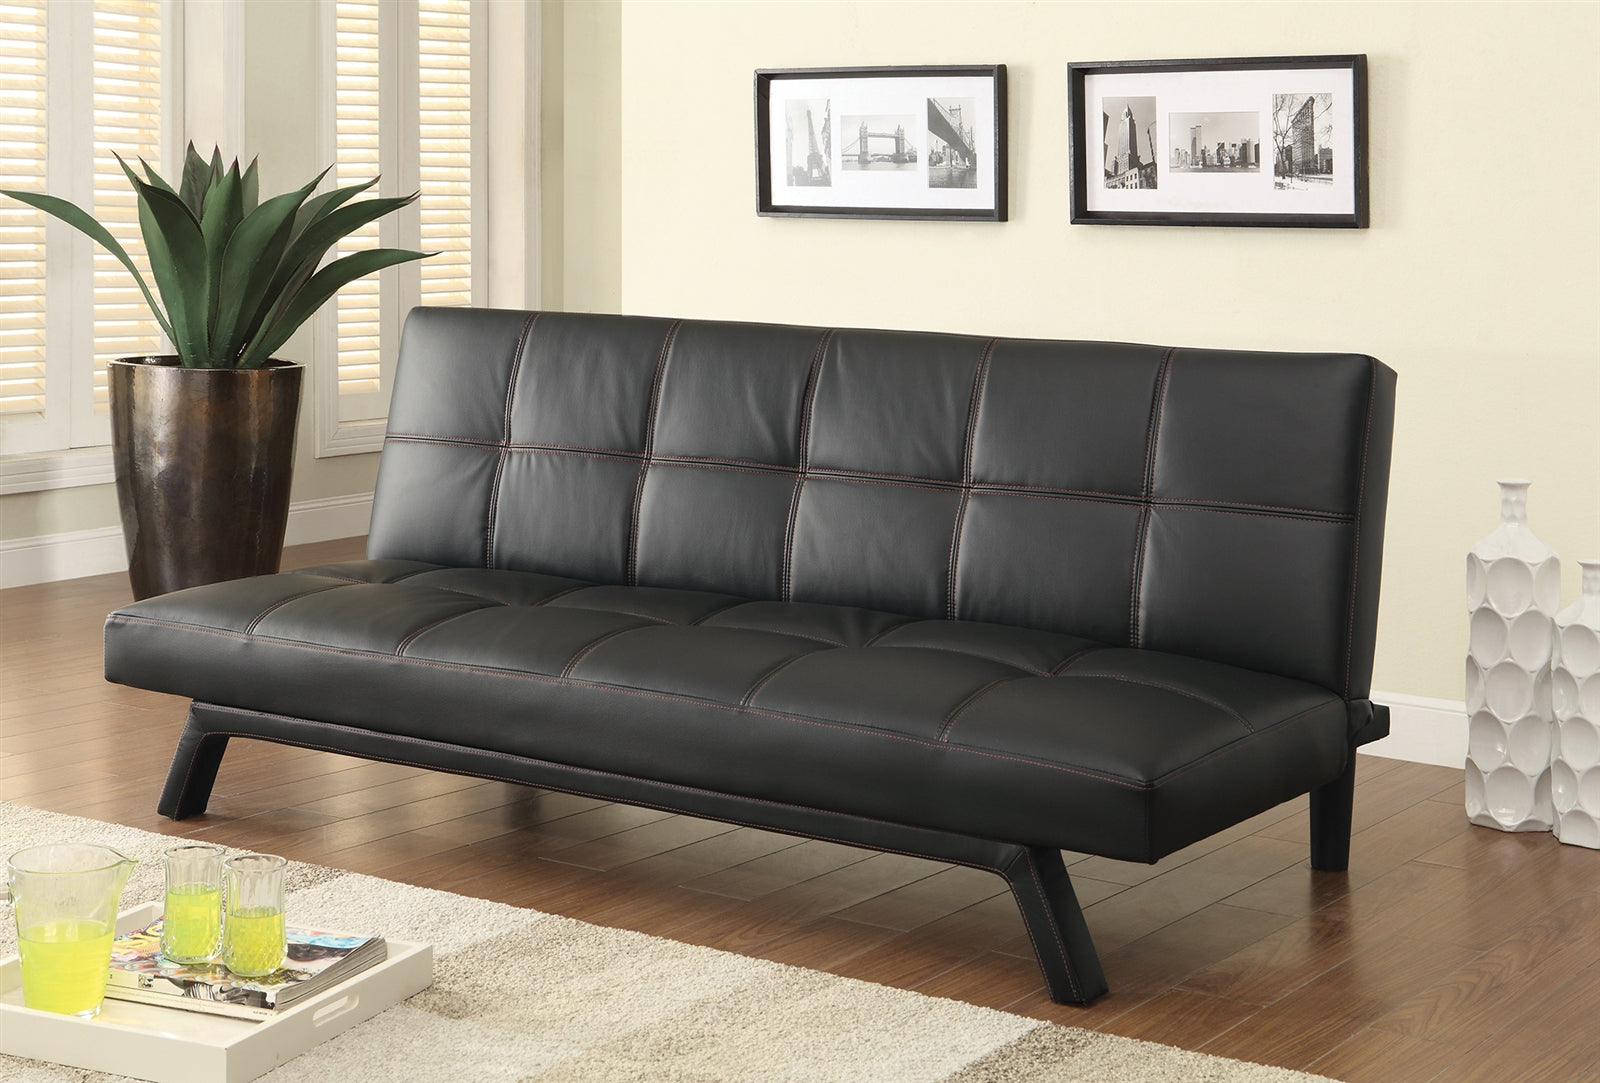 TarK Black Leatherette Sofa Bed With Red Stitching